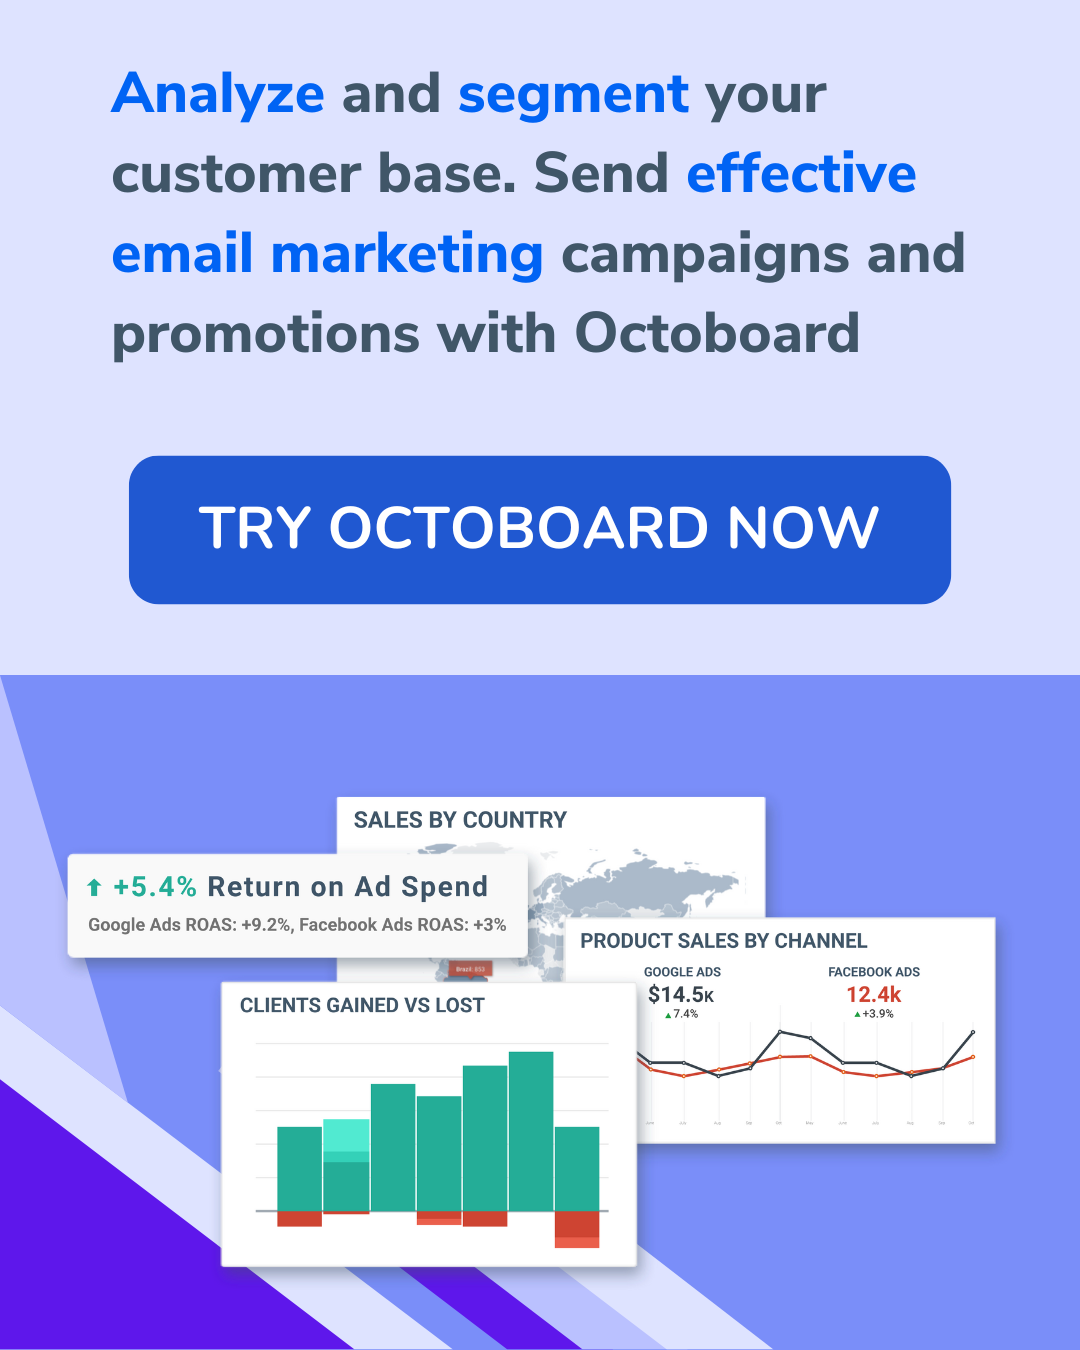 Analyze and segment your customer base. Send effective email marketing campaigns and promotions with Octoboard.